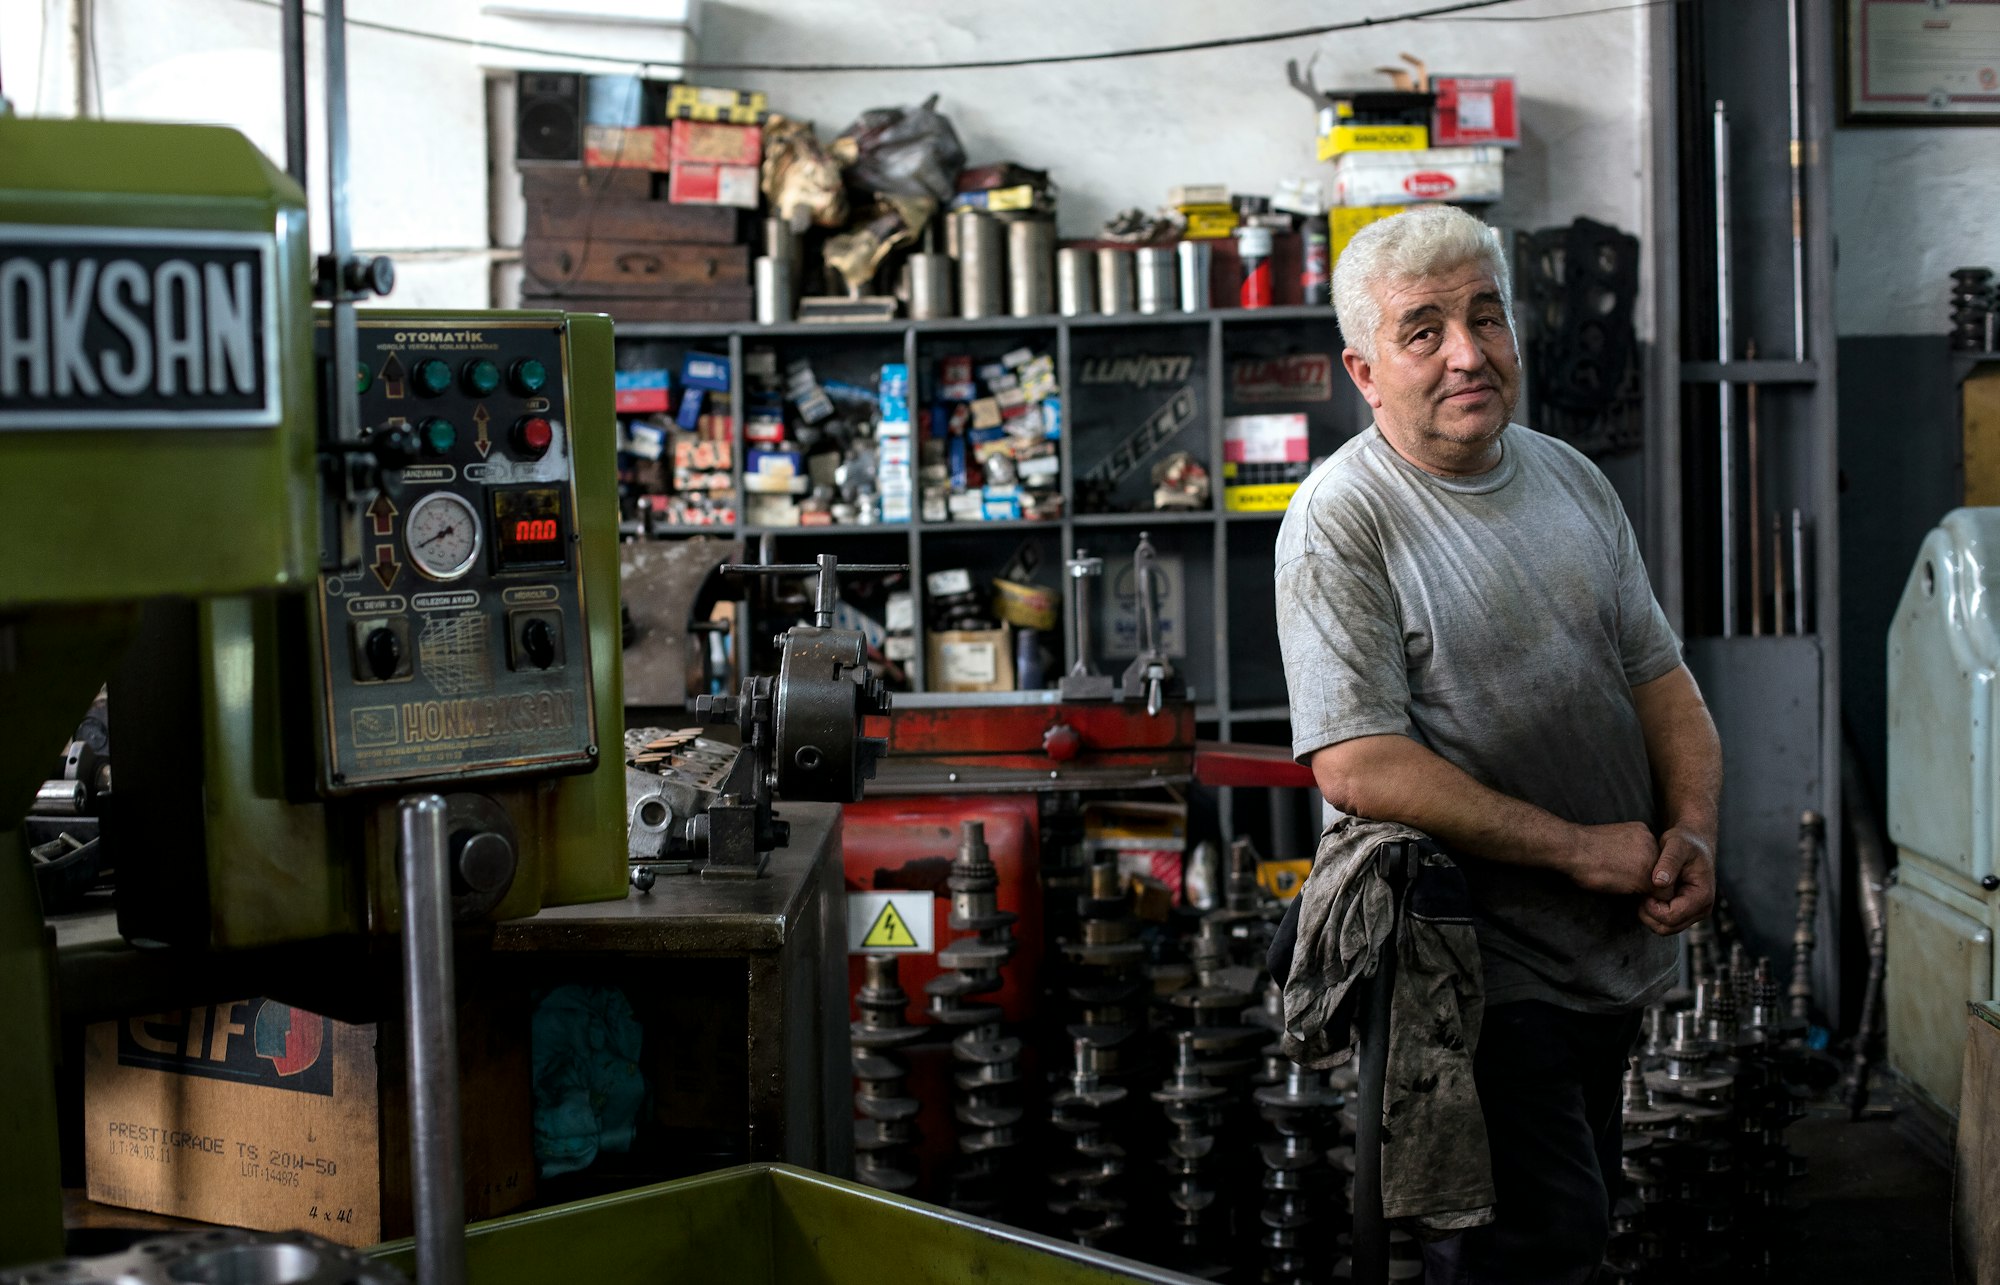 small local business, an older man, owner of the shop, looking at the photo